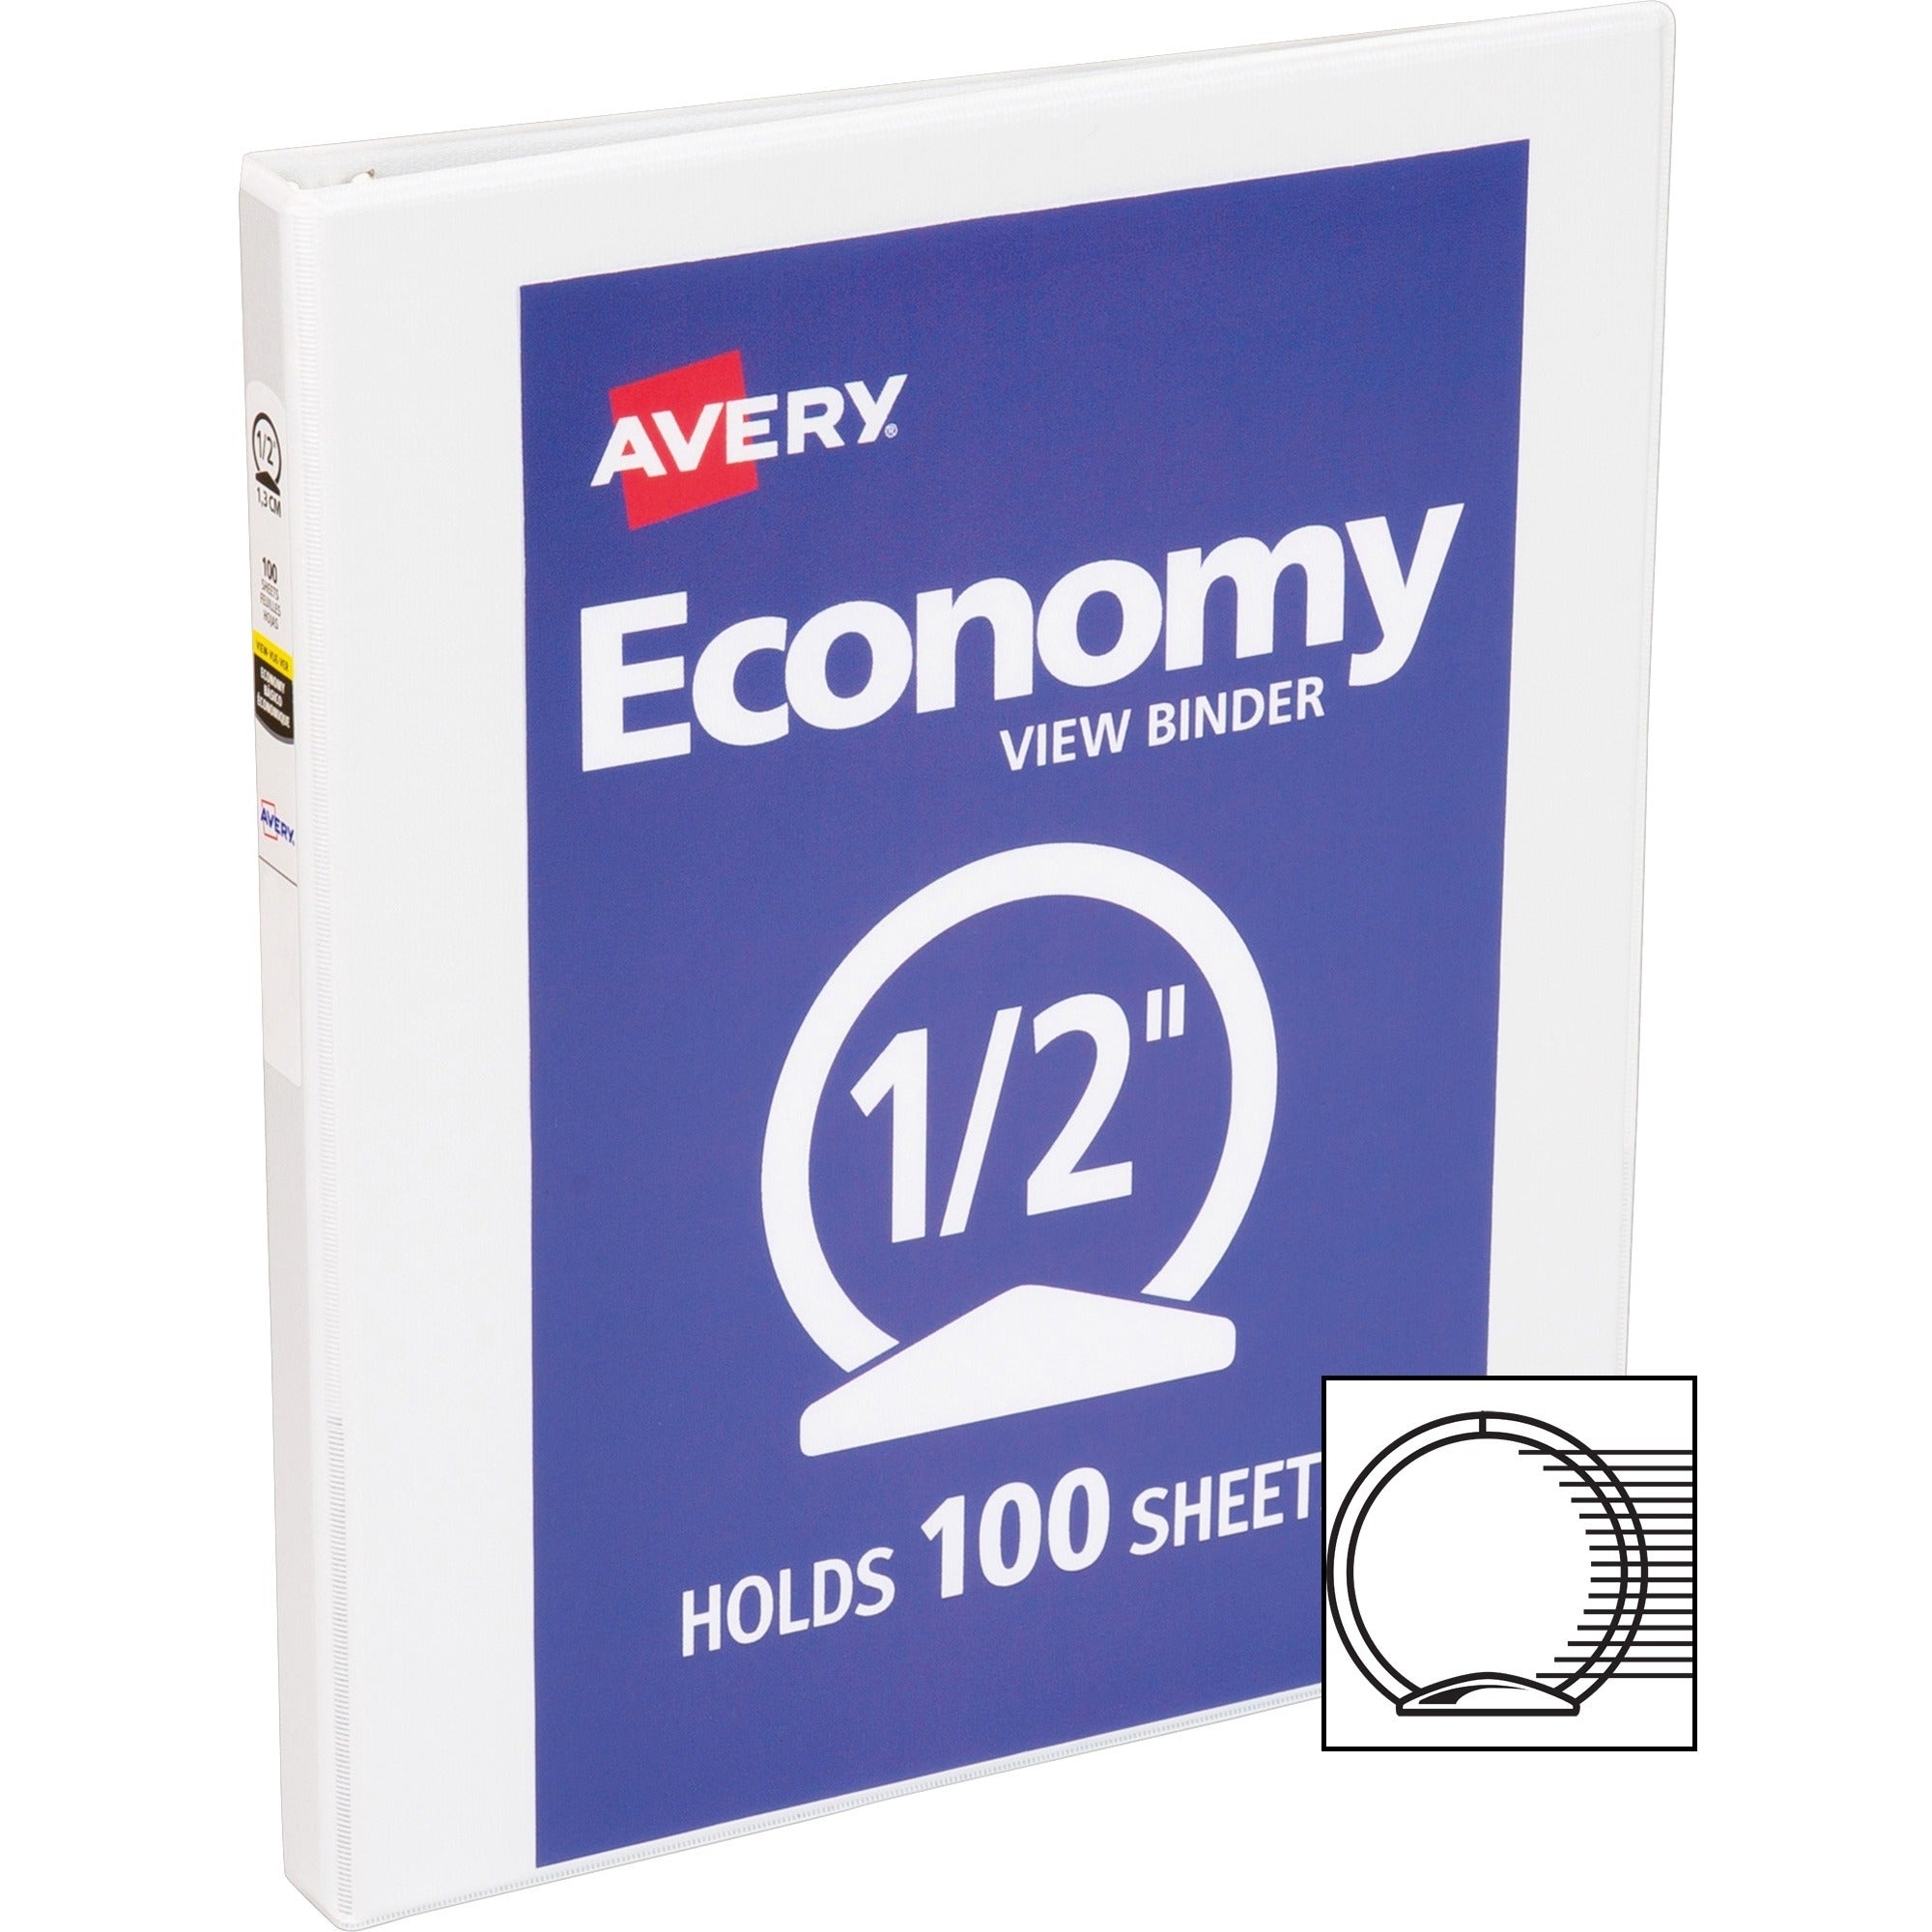 avery-economy-view-binder_ave05706bd - 2